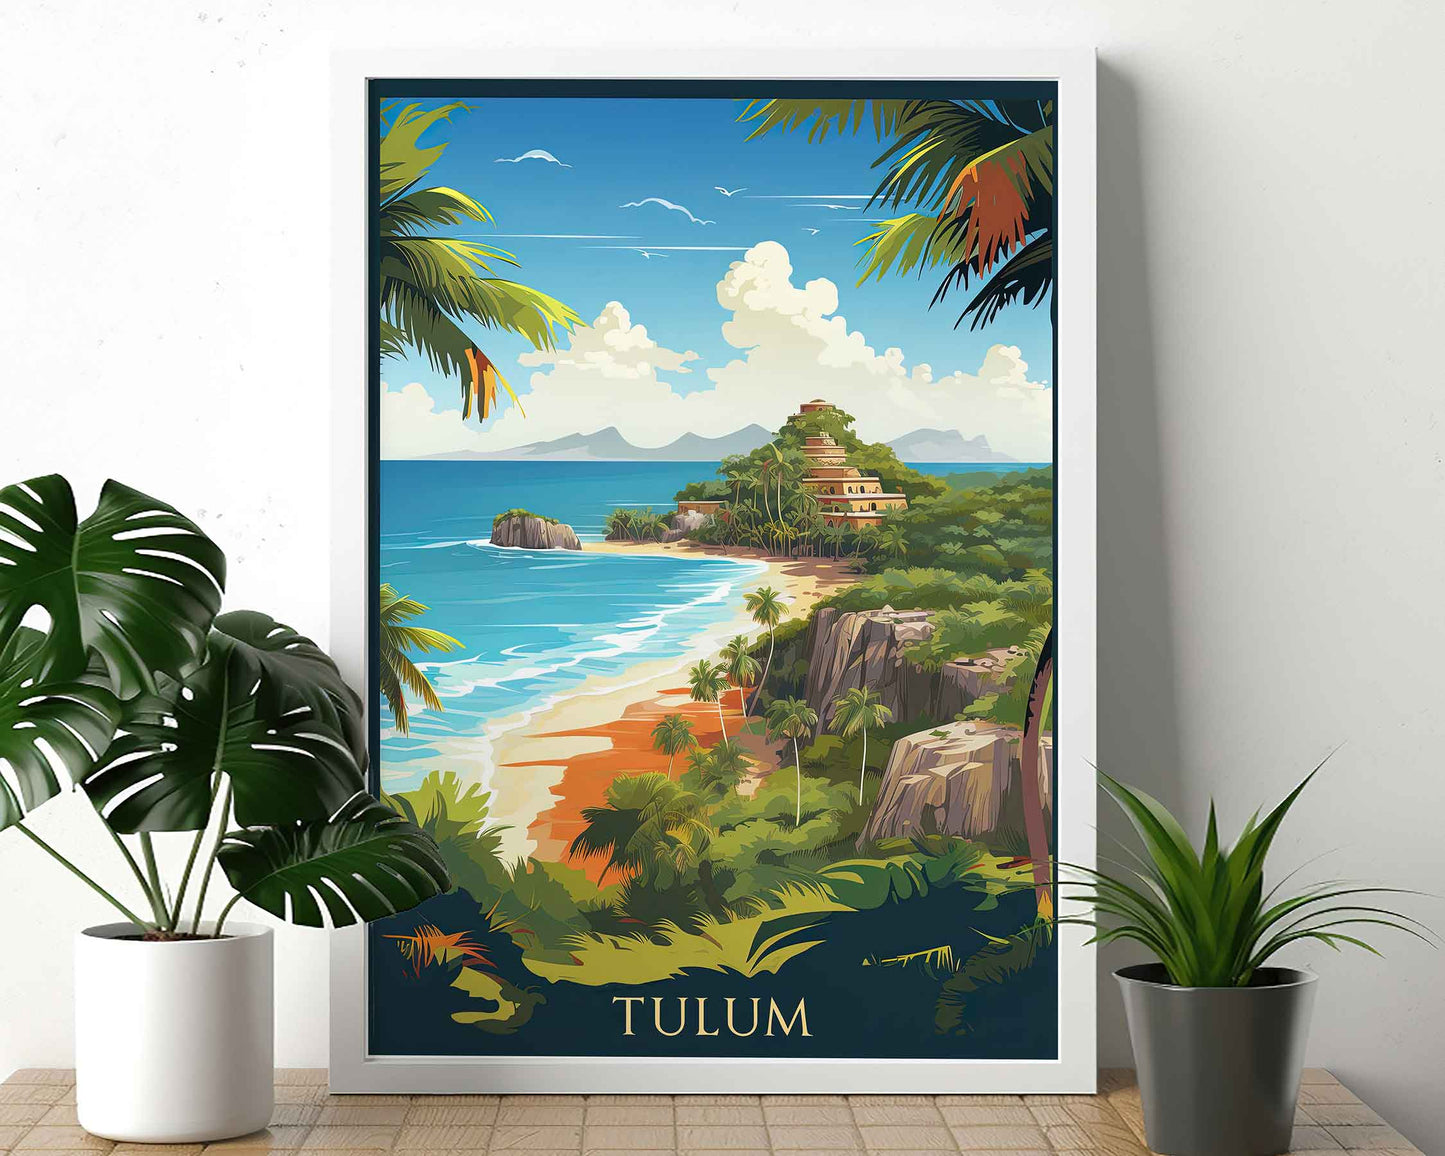 Framed Image of Tulum Tourism Poster Travel Wall Art Print, Mexico Illustration